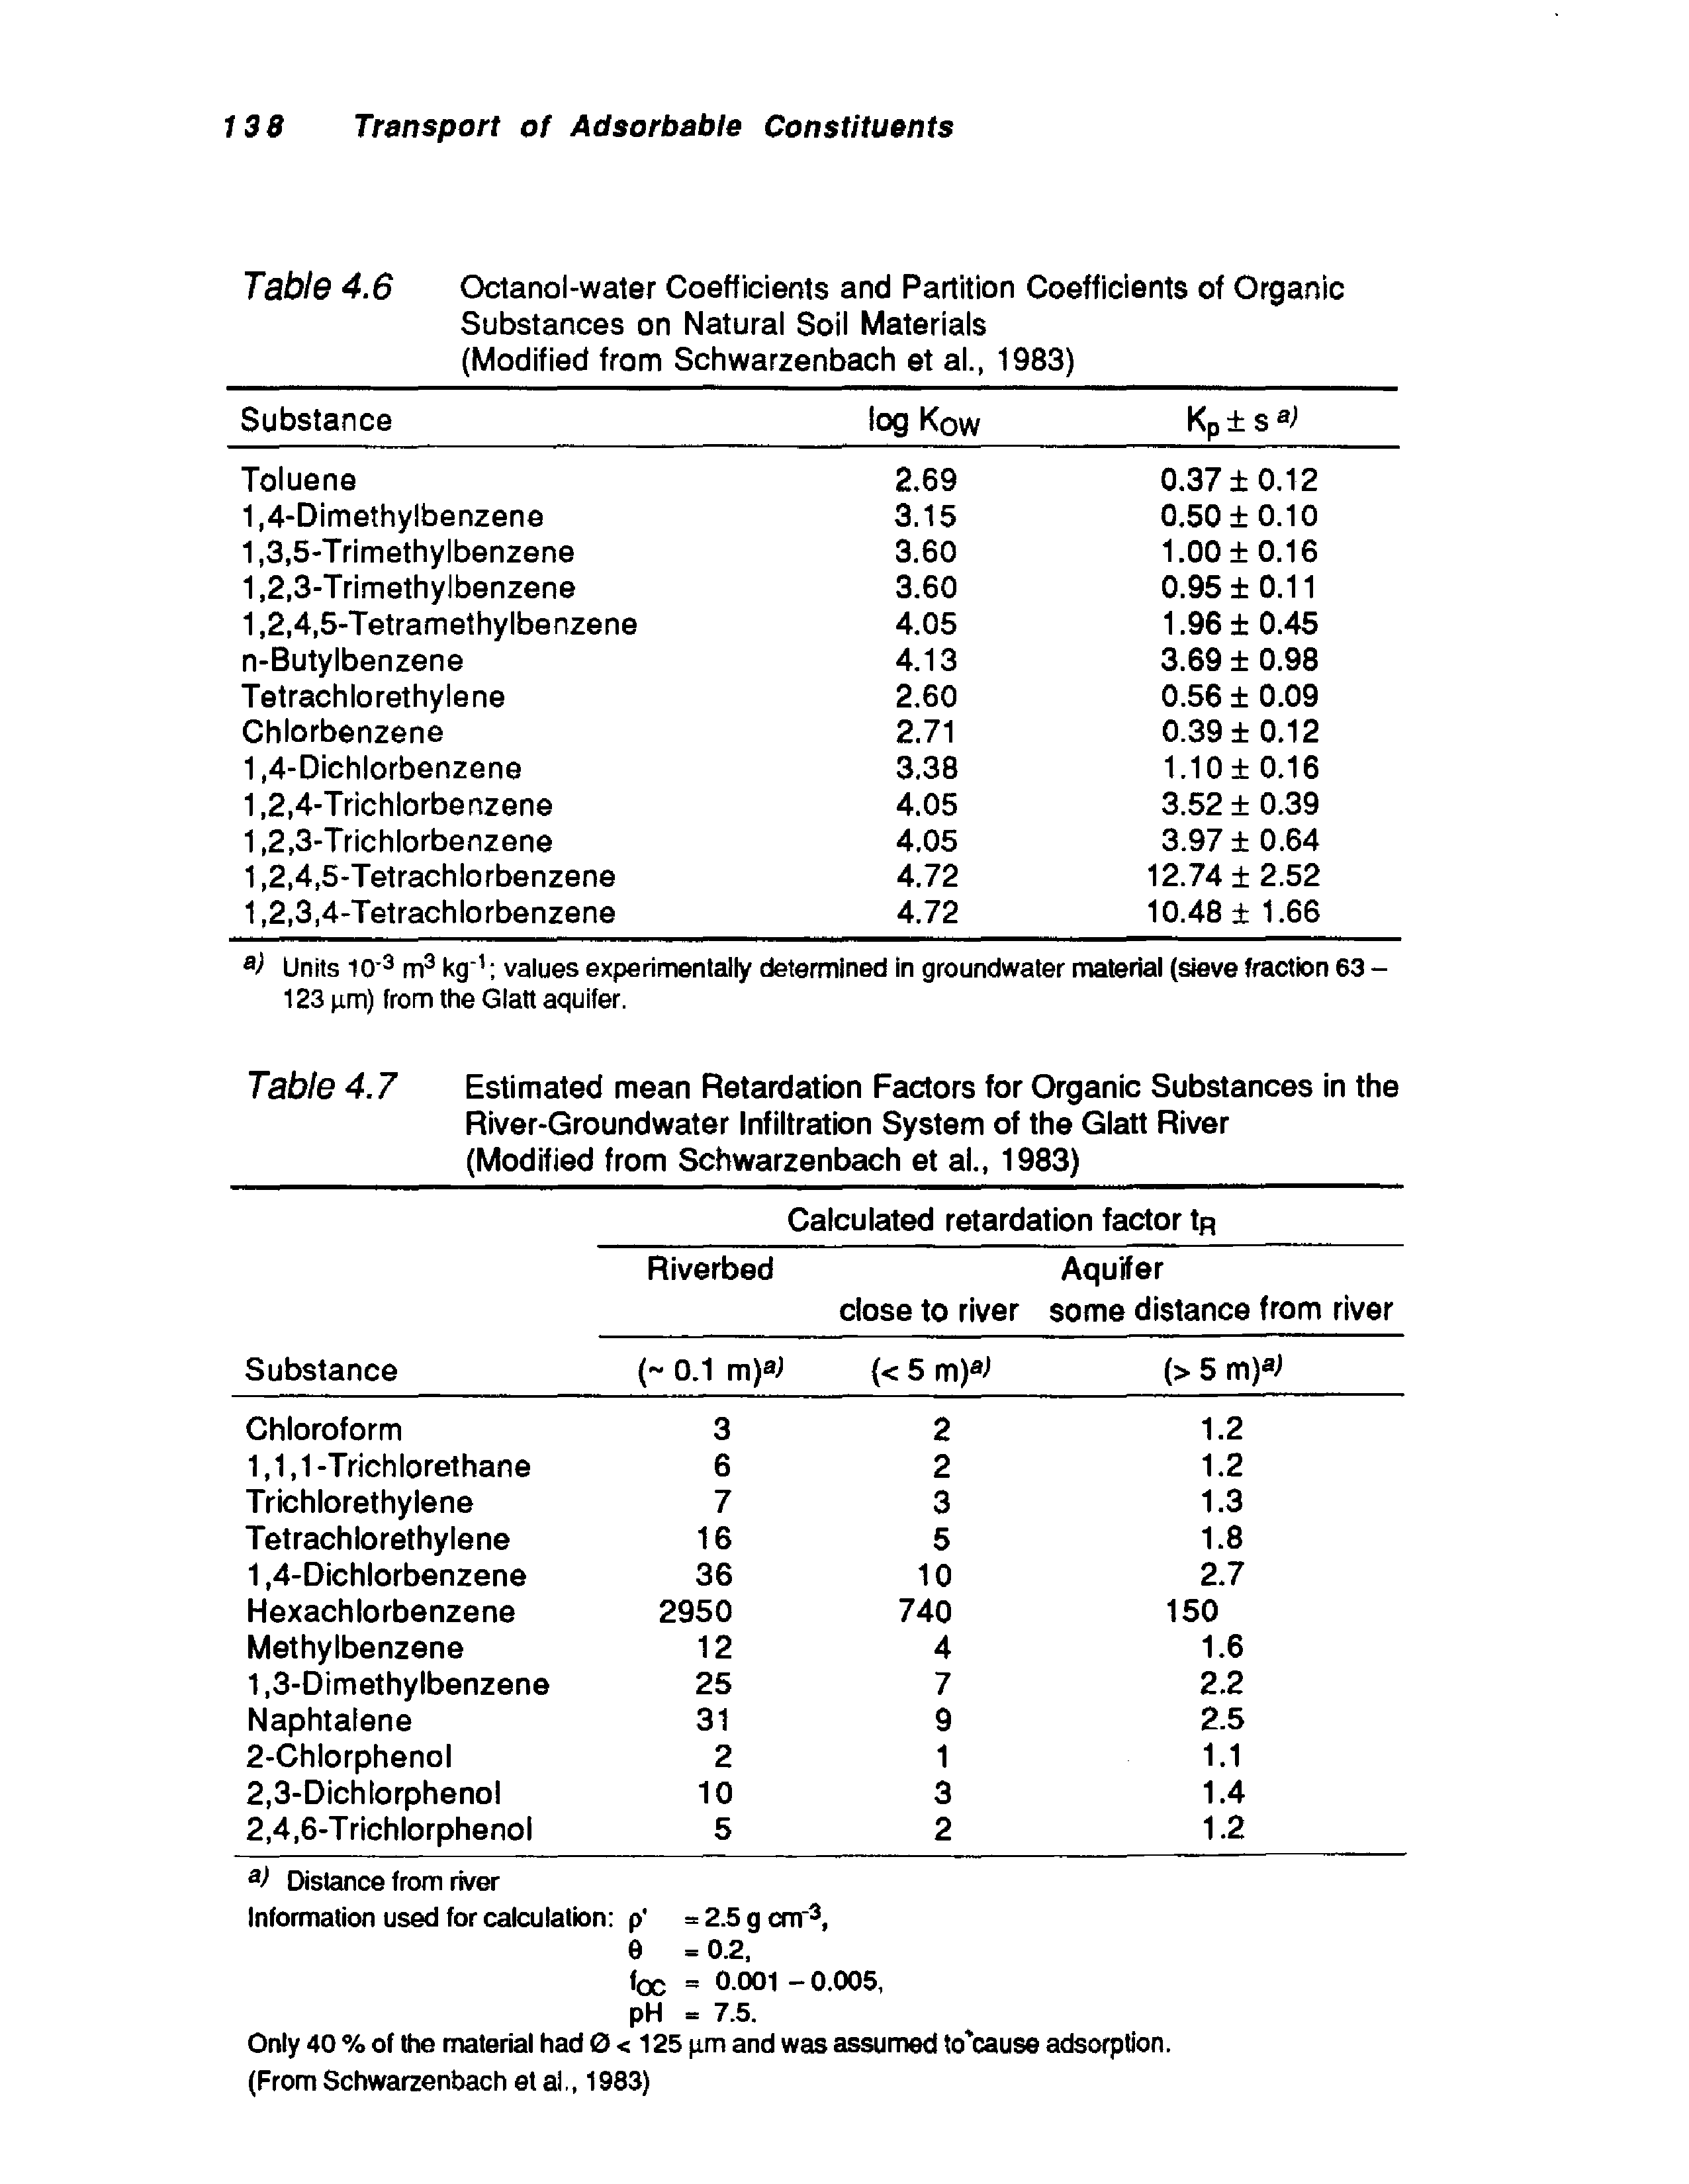 Table 4.6 Octanol-water Coefficients and Partition Coefficients of Organic Substances on Natural Soil Materials (Modified from Schwarzenbach et al., 1983)...